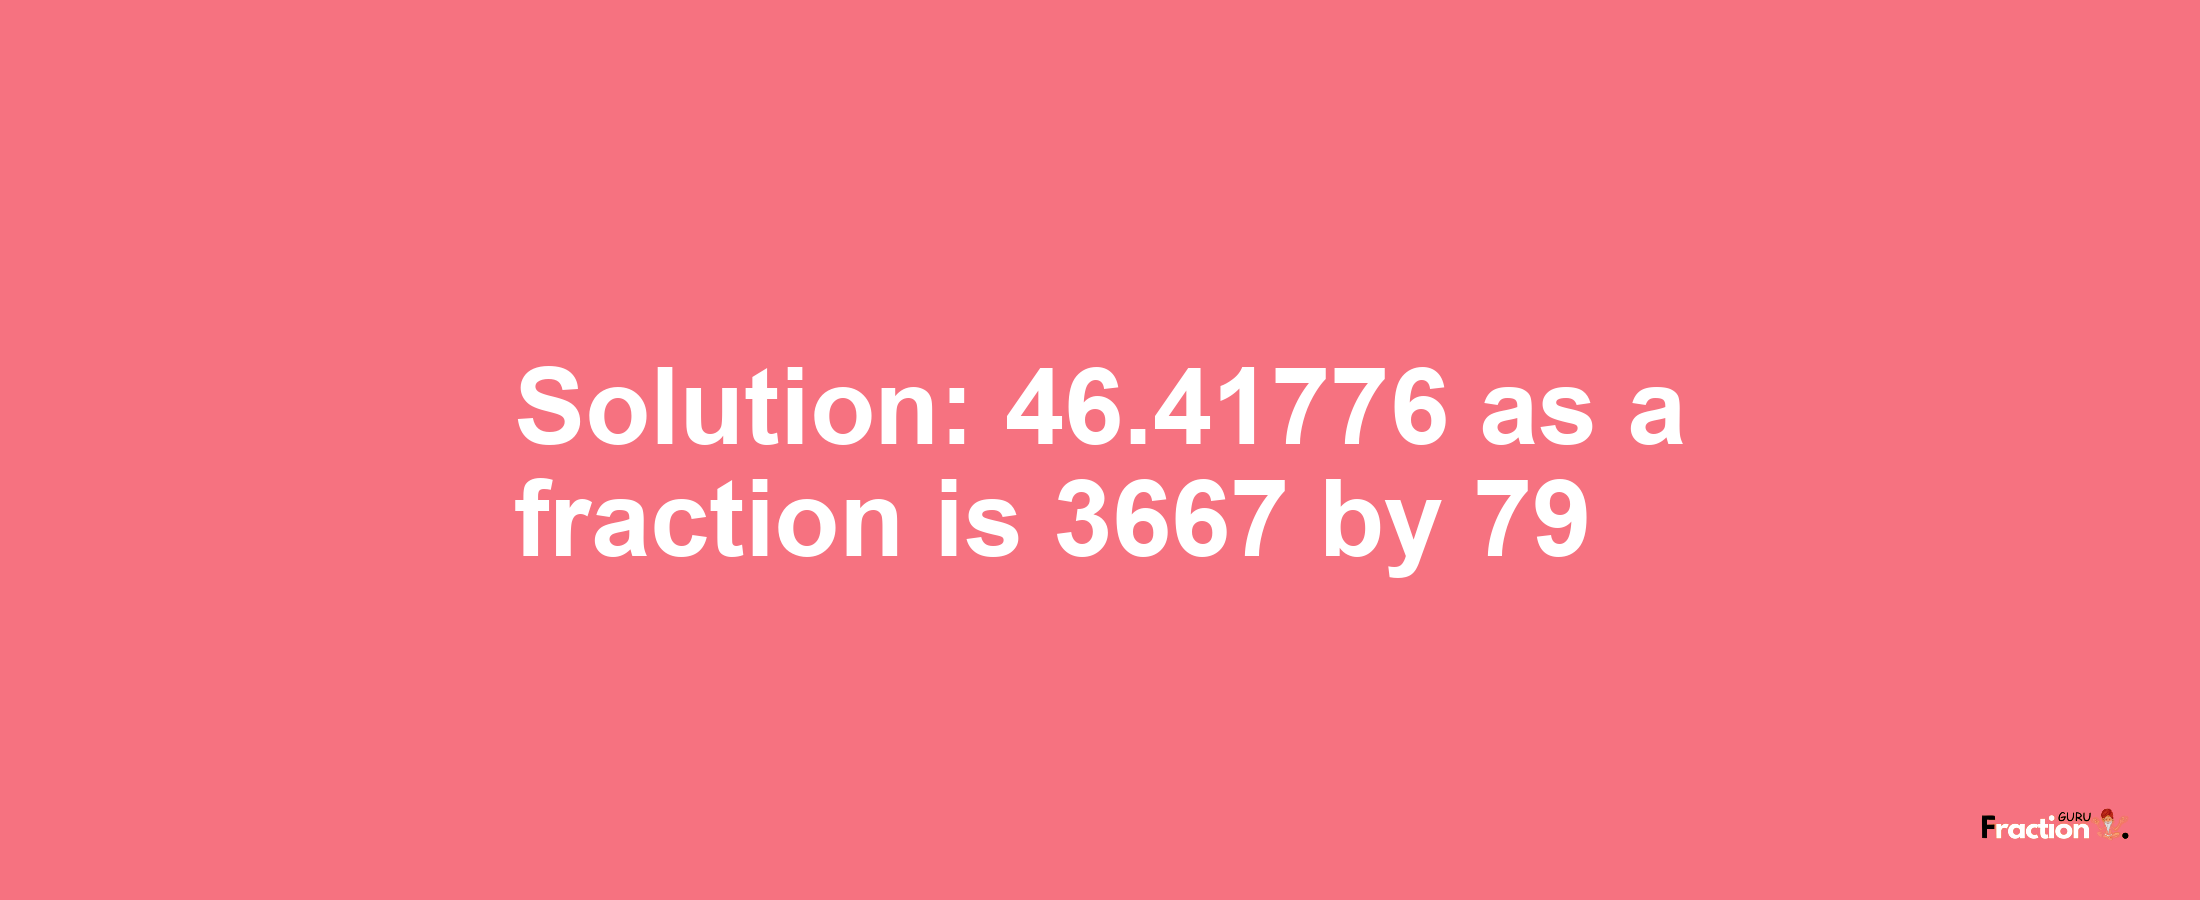 Solution:46.41776 as a fraction is 3667/79